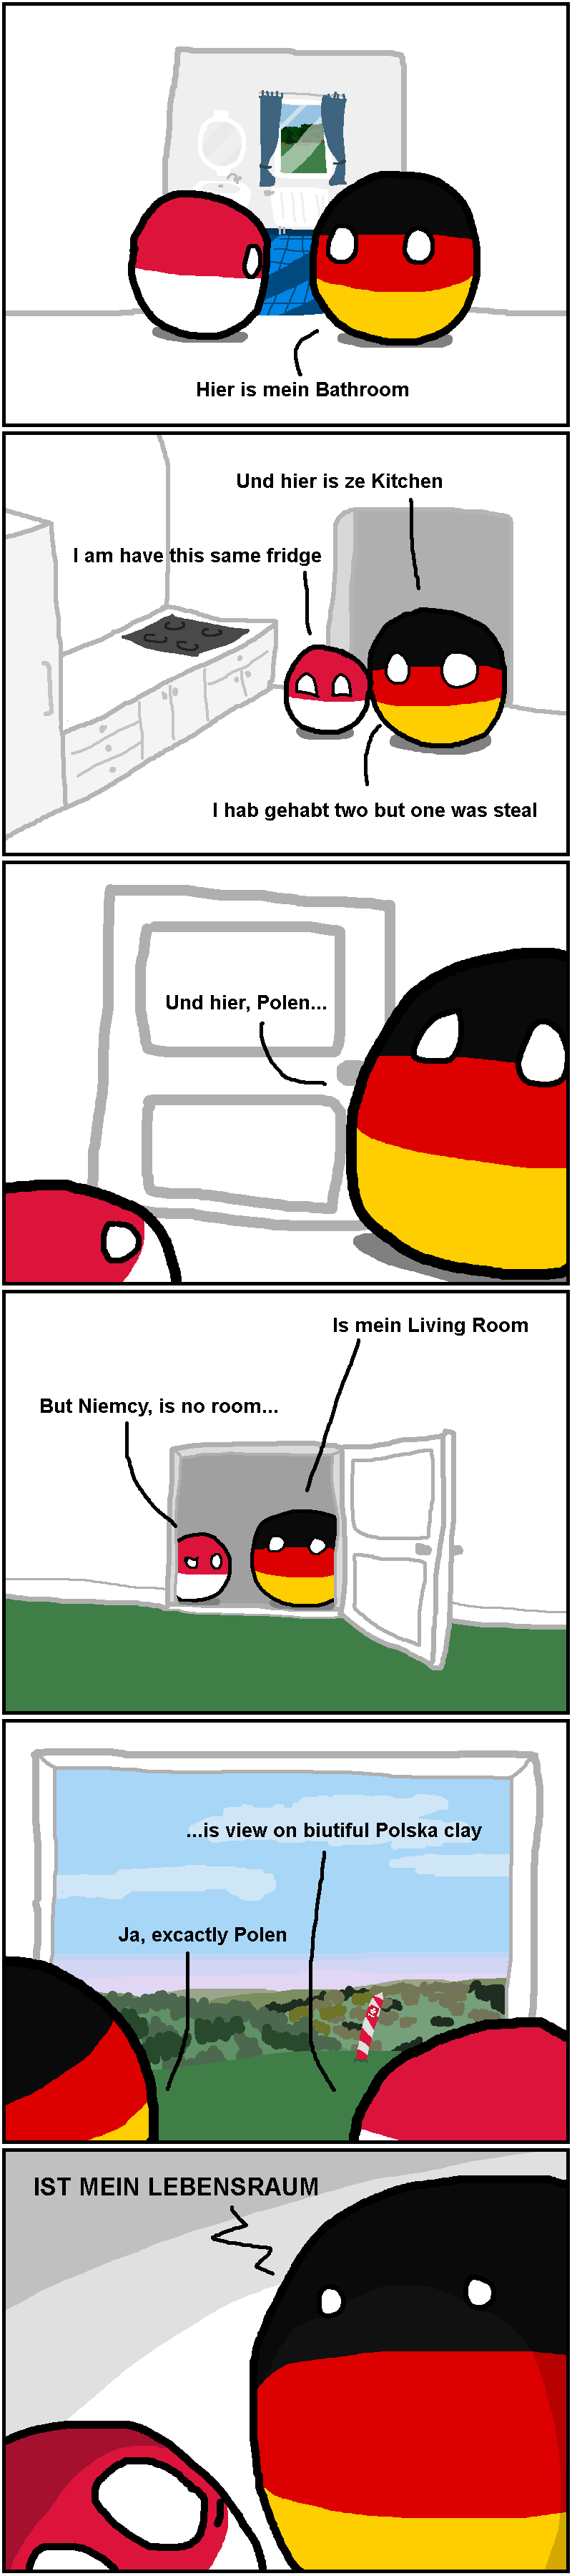 Germany's house